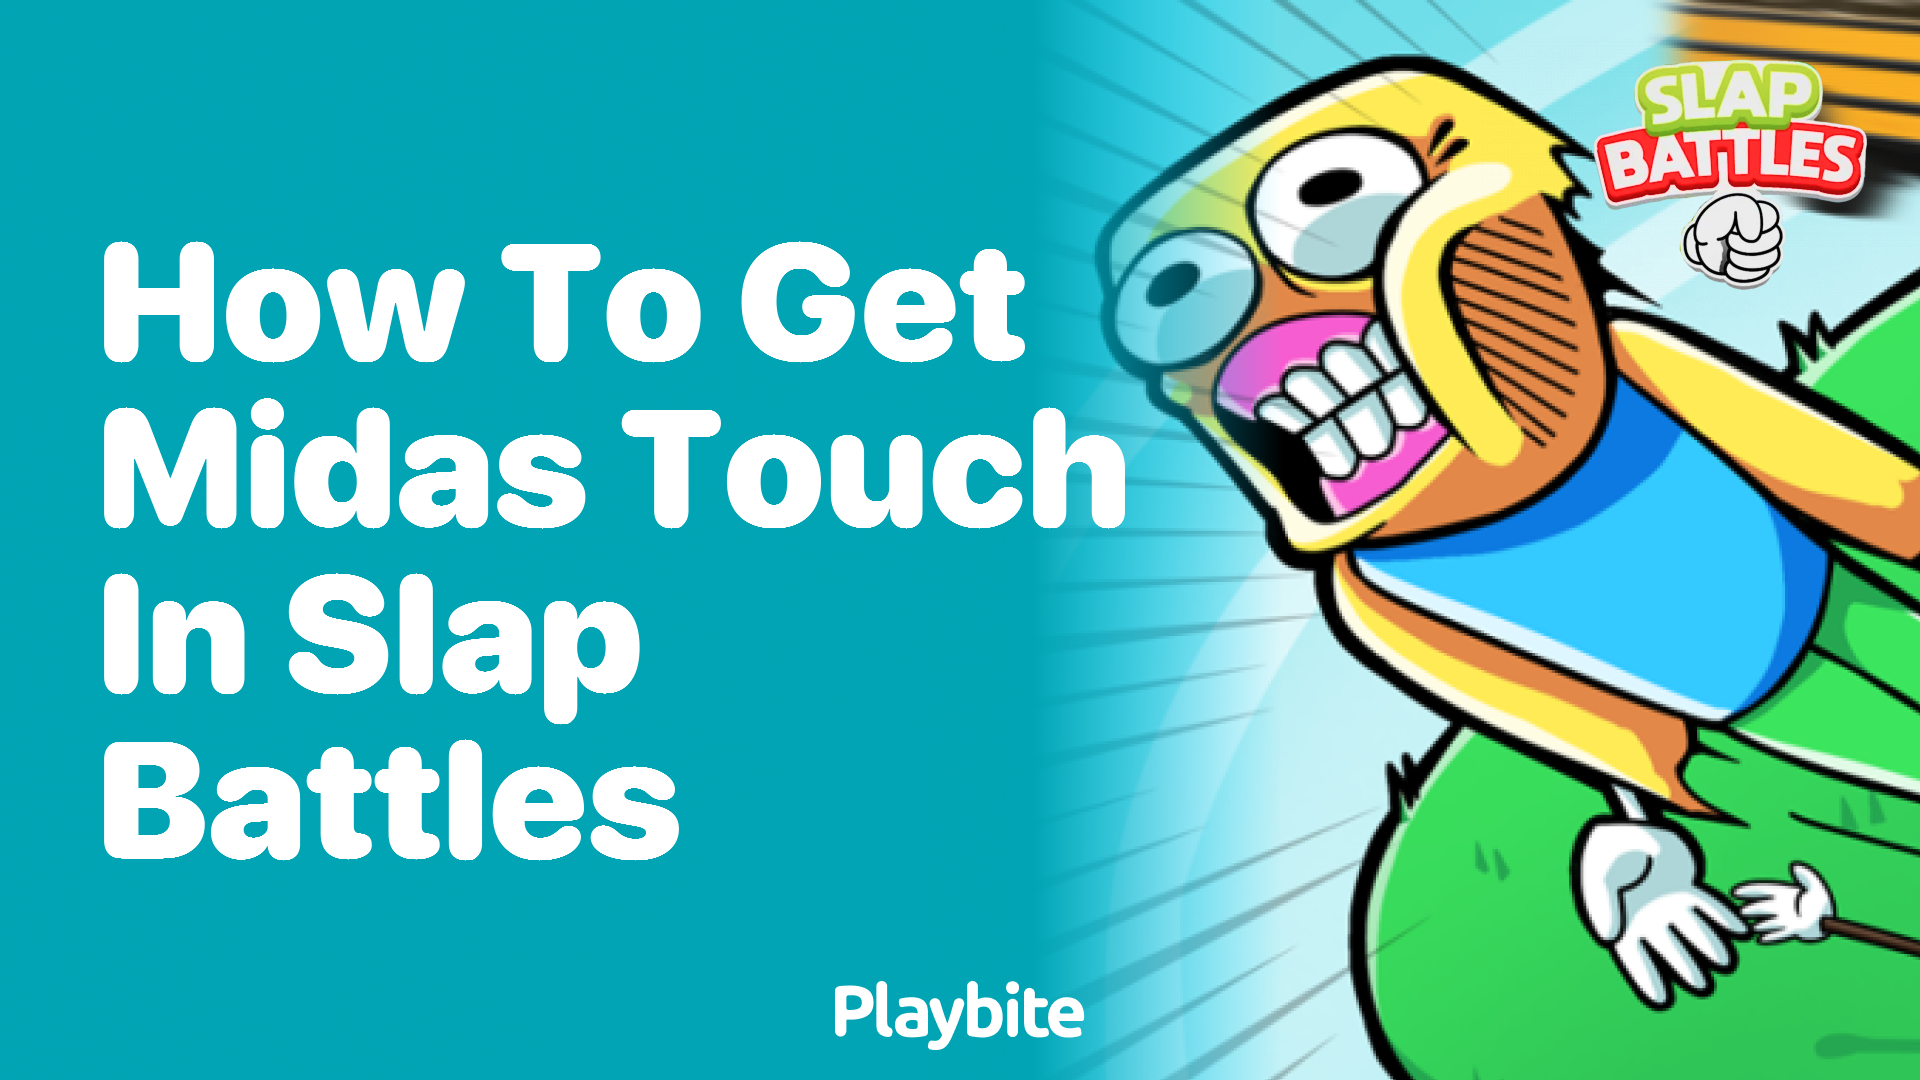 How to Get Midas Touch in Slap Battles